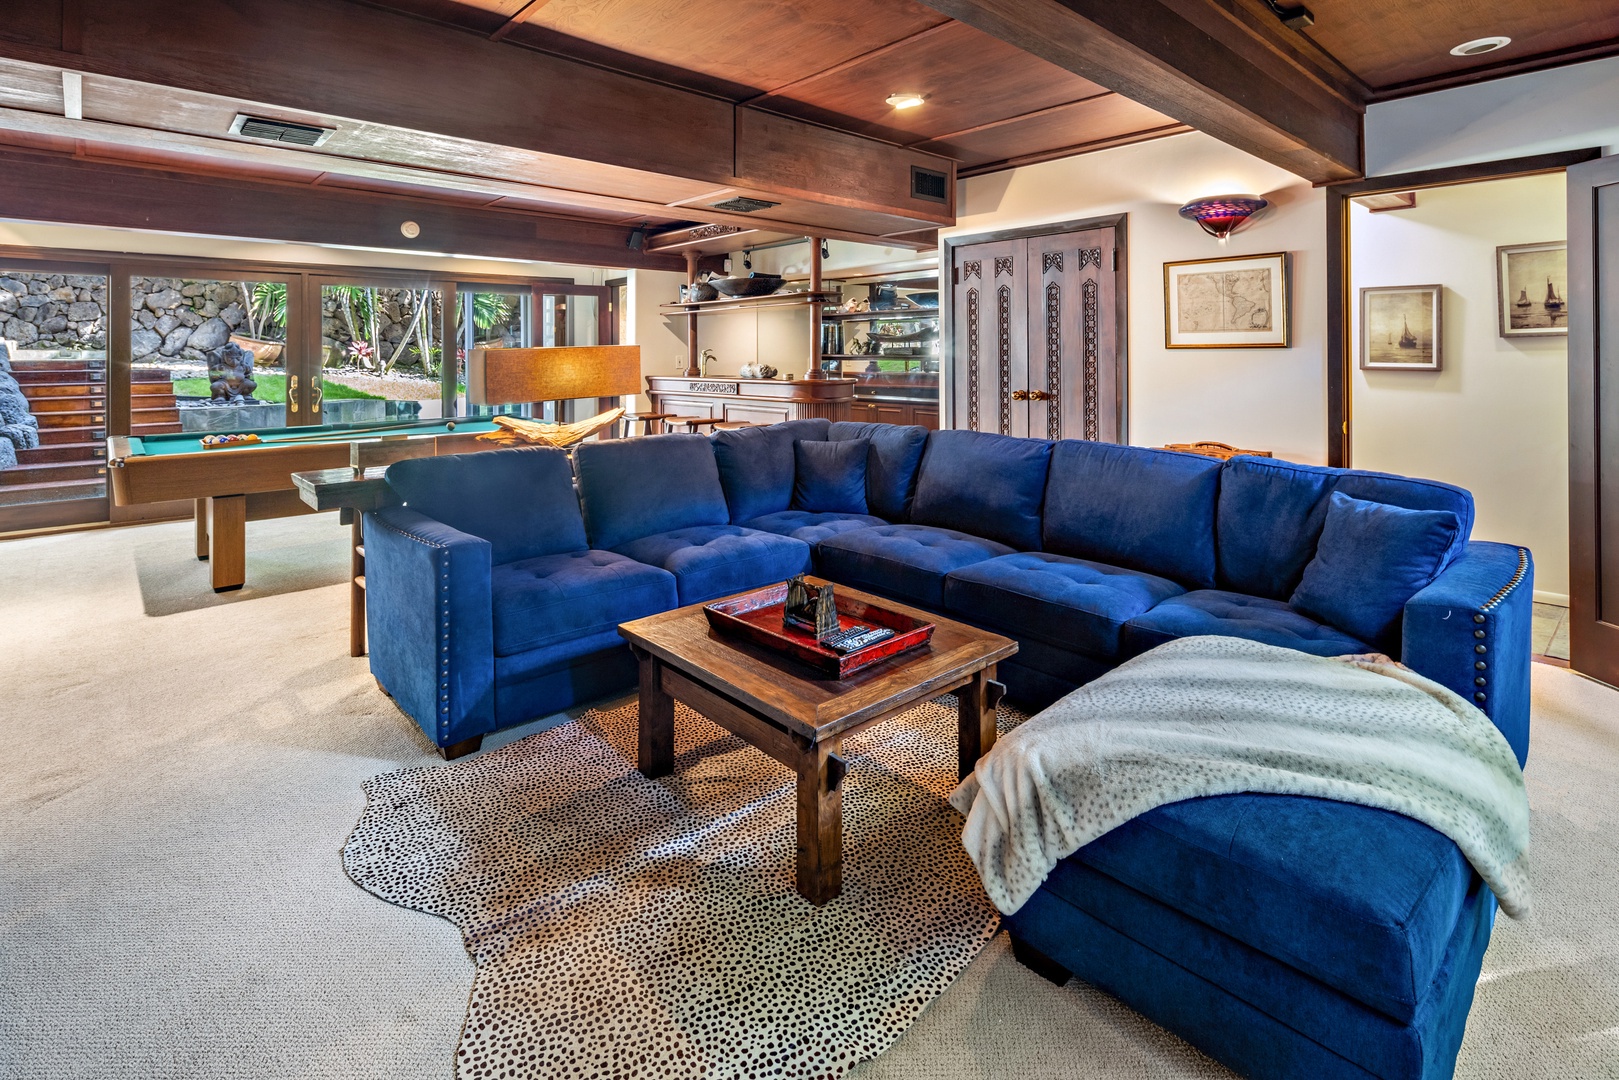 Honolulu Vacation Rentals, Kaiko'o Villa** - The ground floor of Kaiko’o Villa features the game, bar, and theater room of your dreams